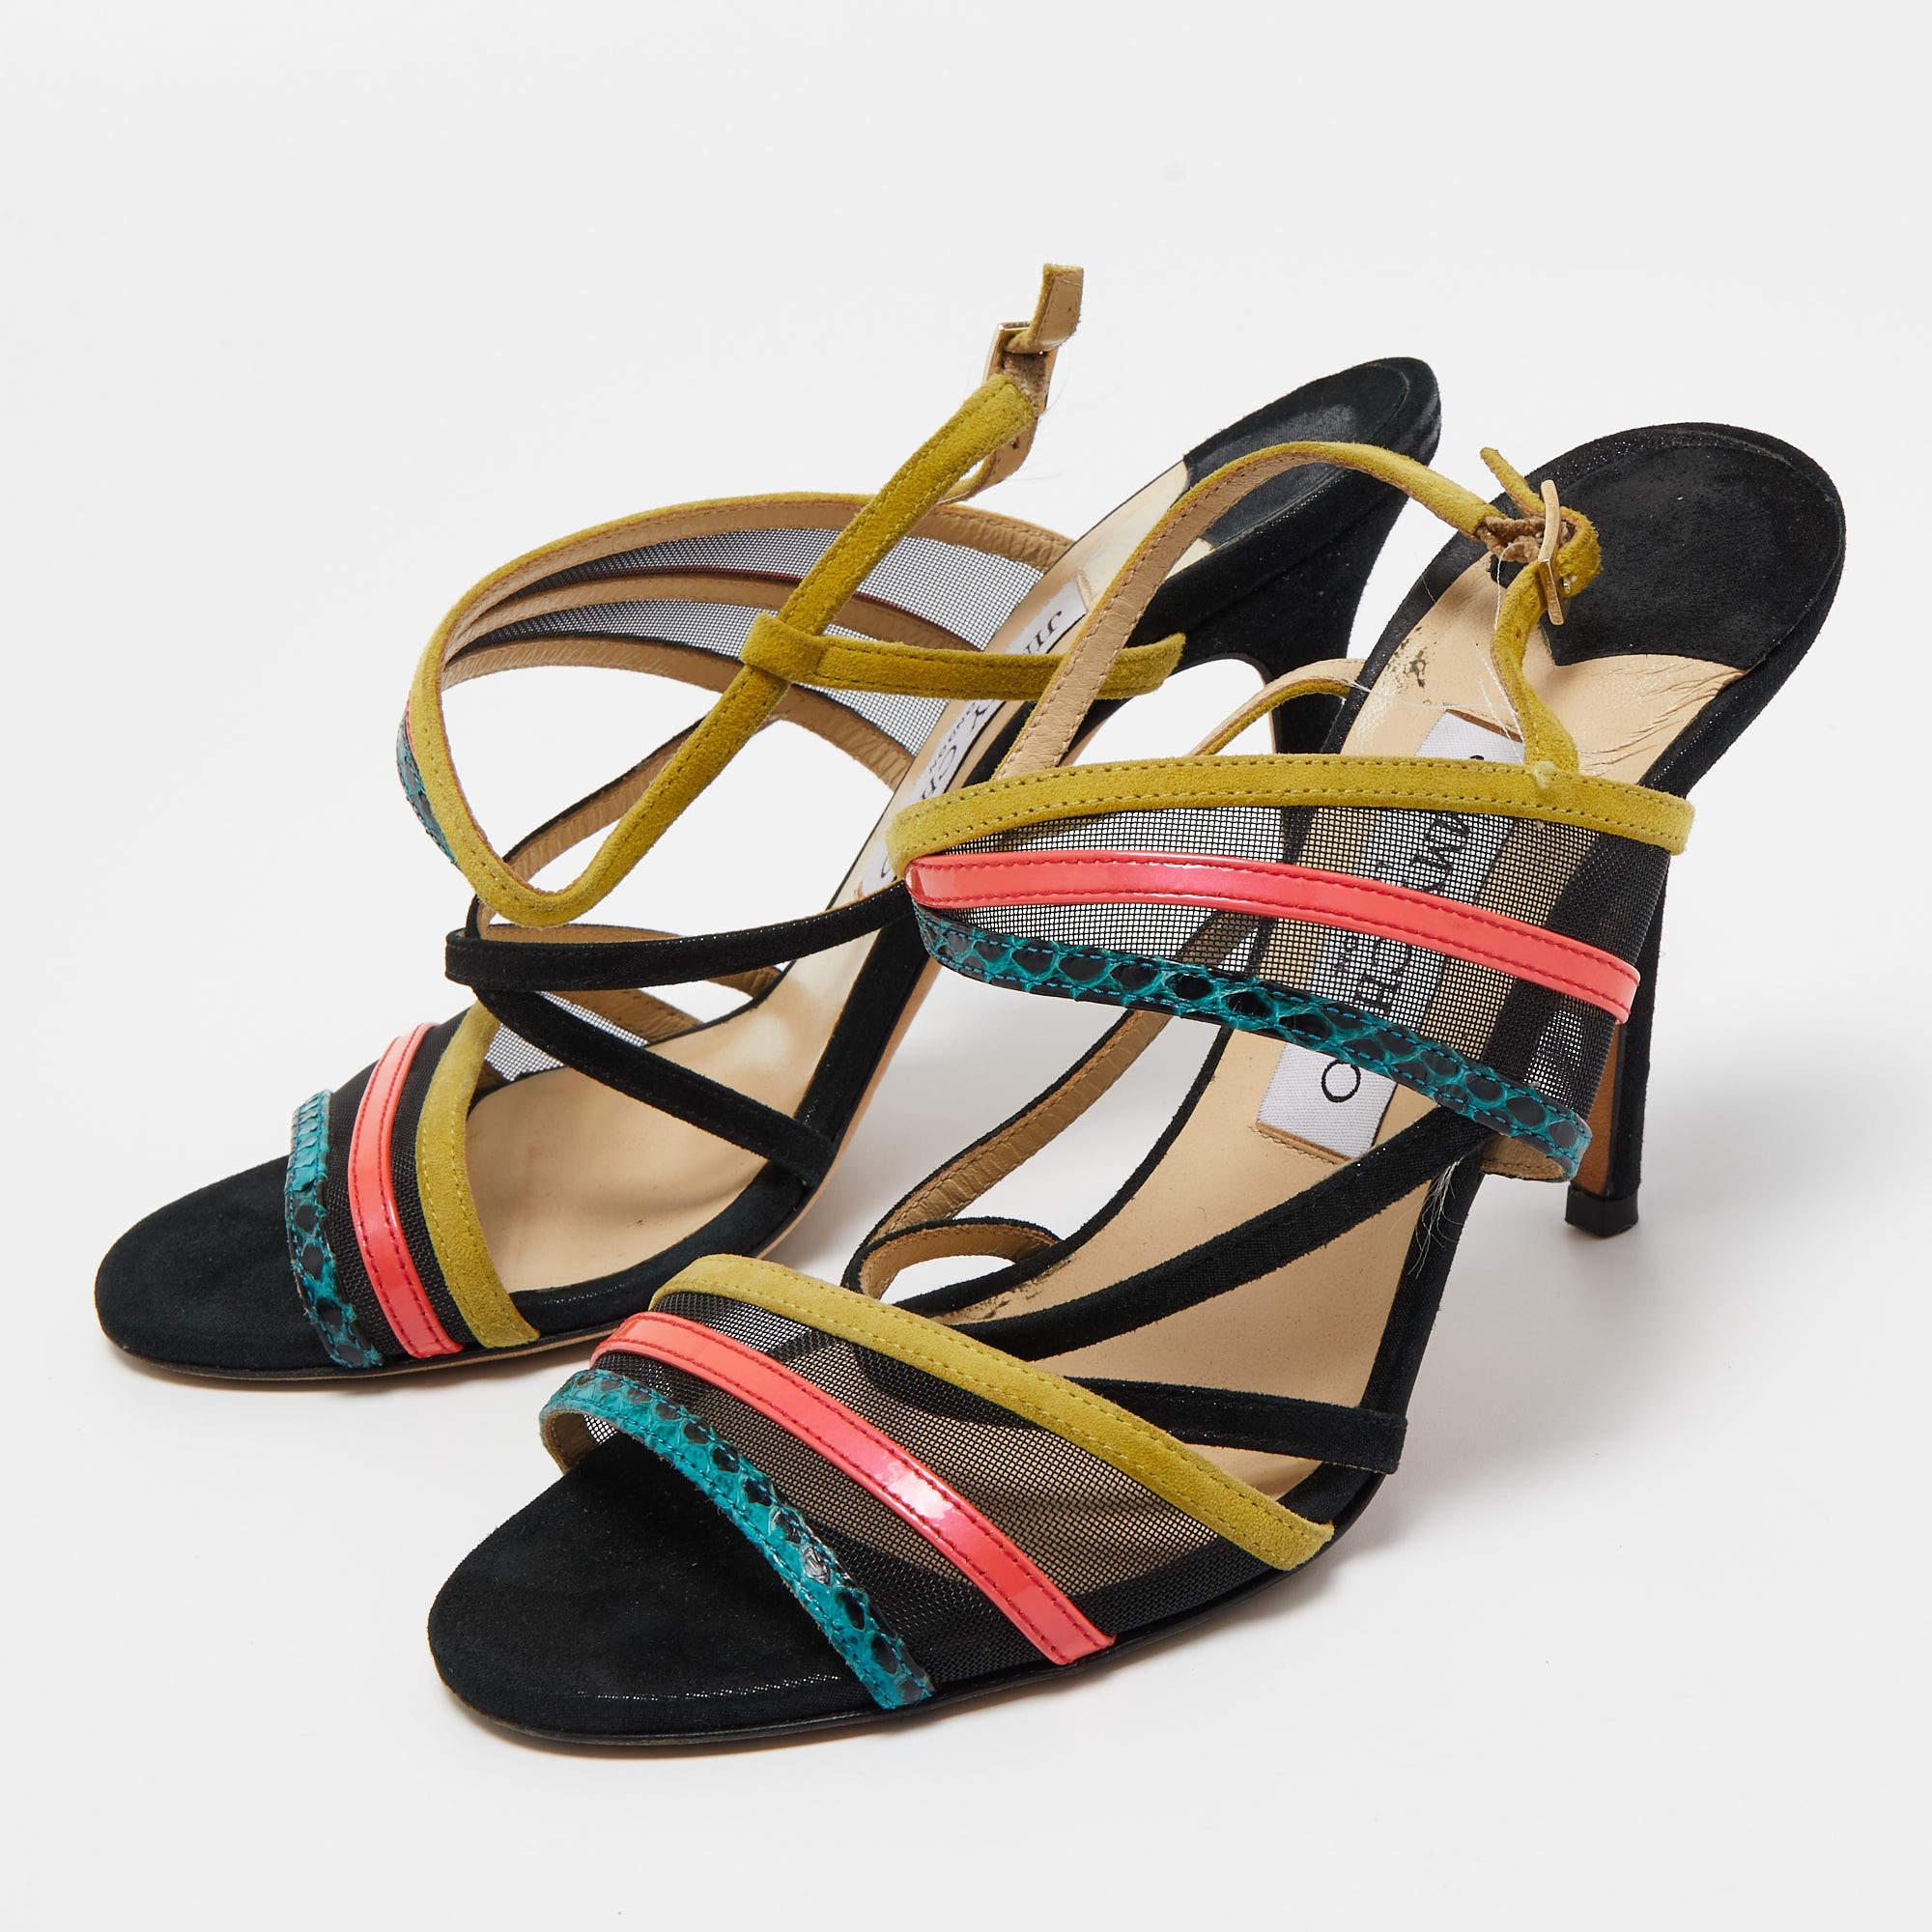 Jimmy Choo Multicolor Suede and Mesh Ankle Strap Sandals Size 36.5 In Good Condition For Sale In Dubai, Al Qouz 2